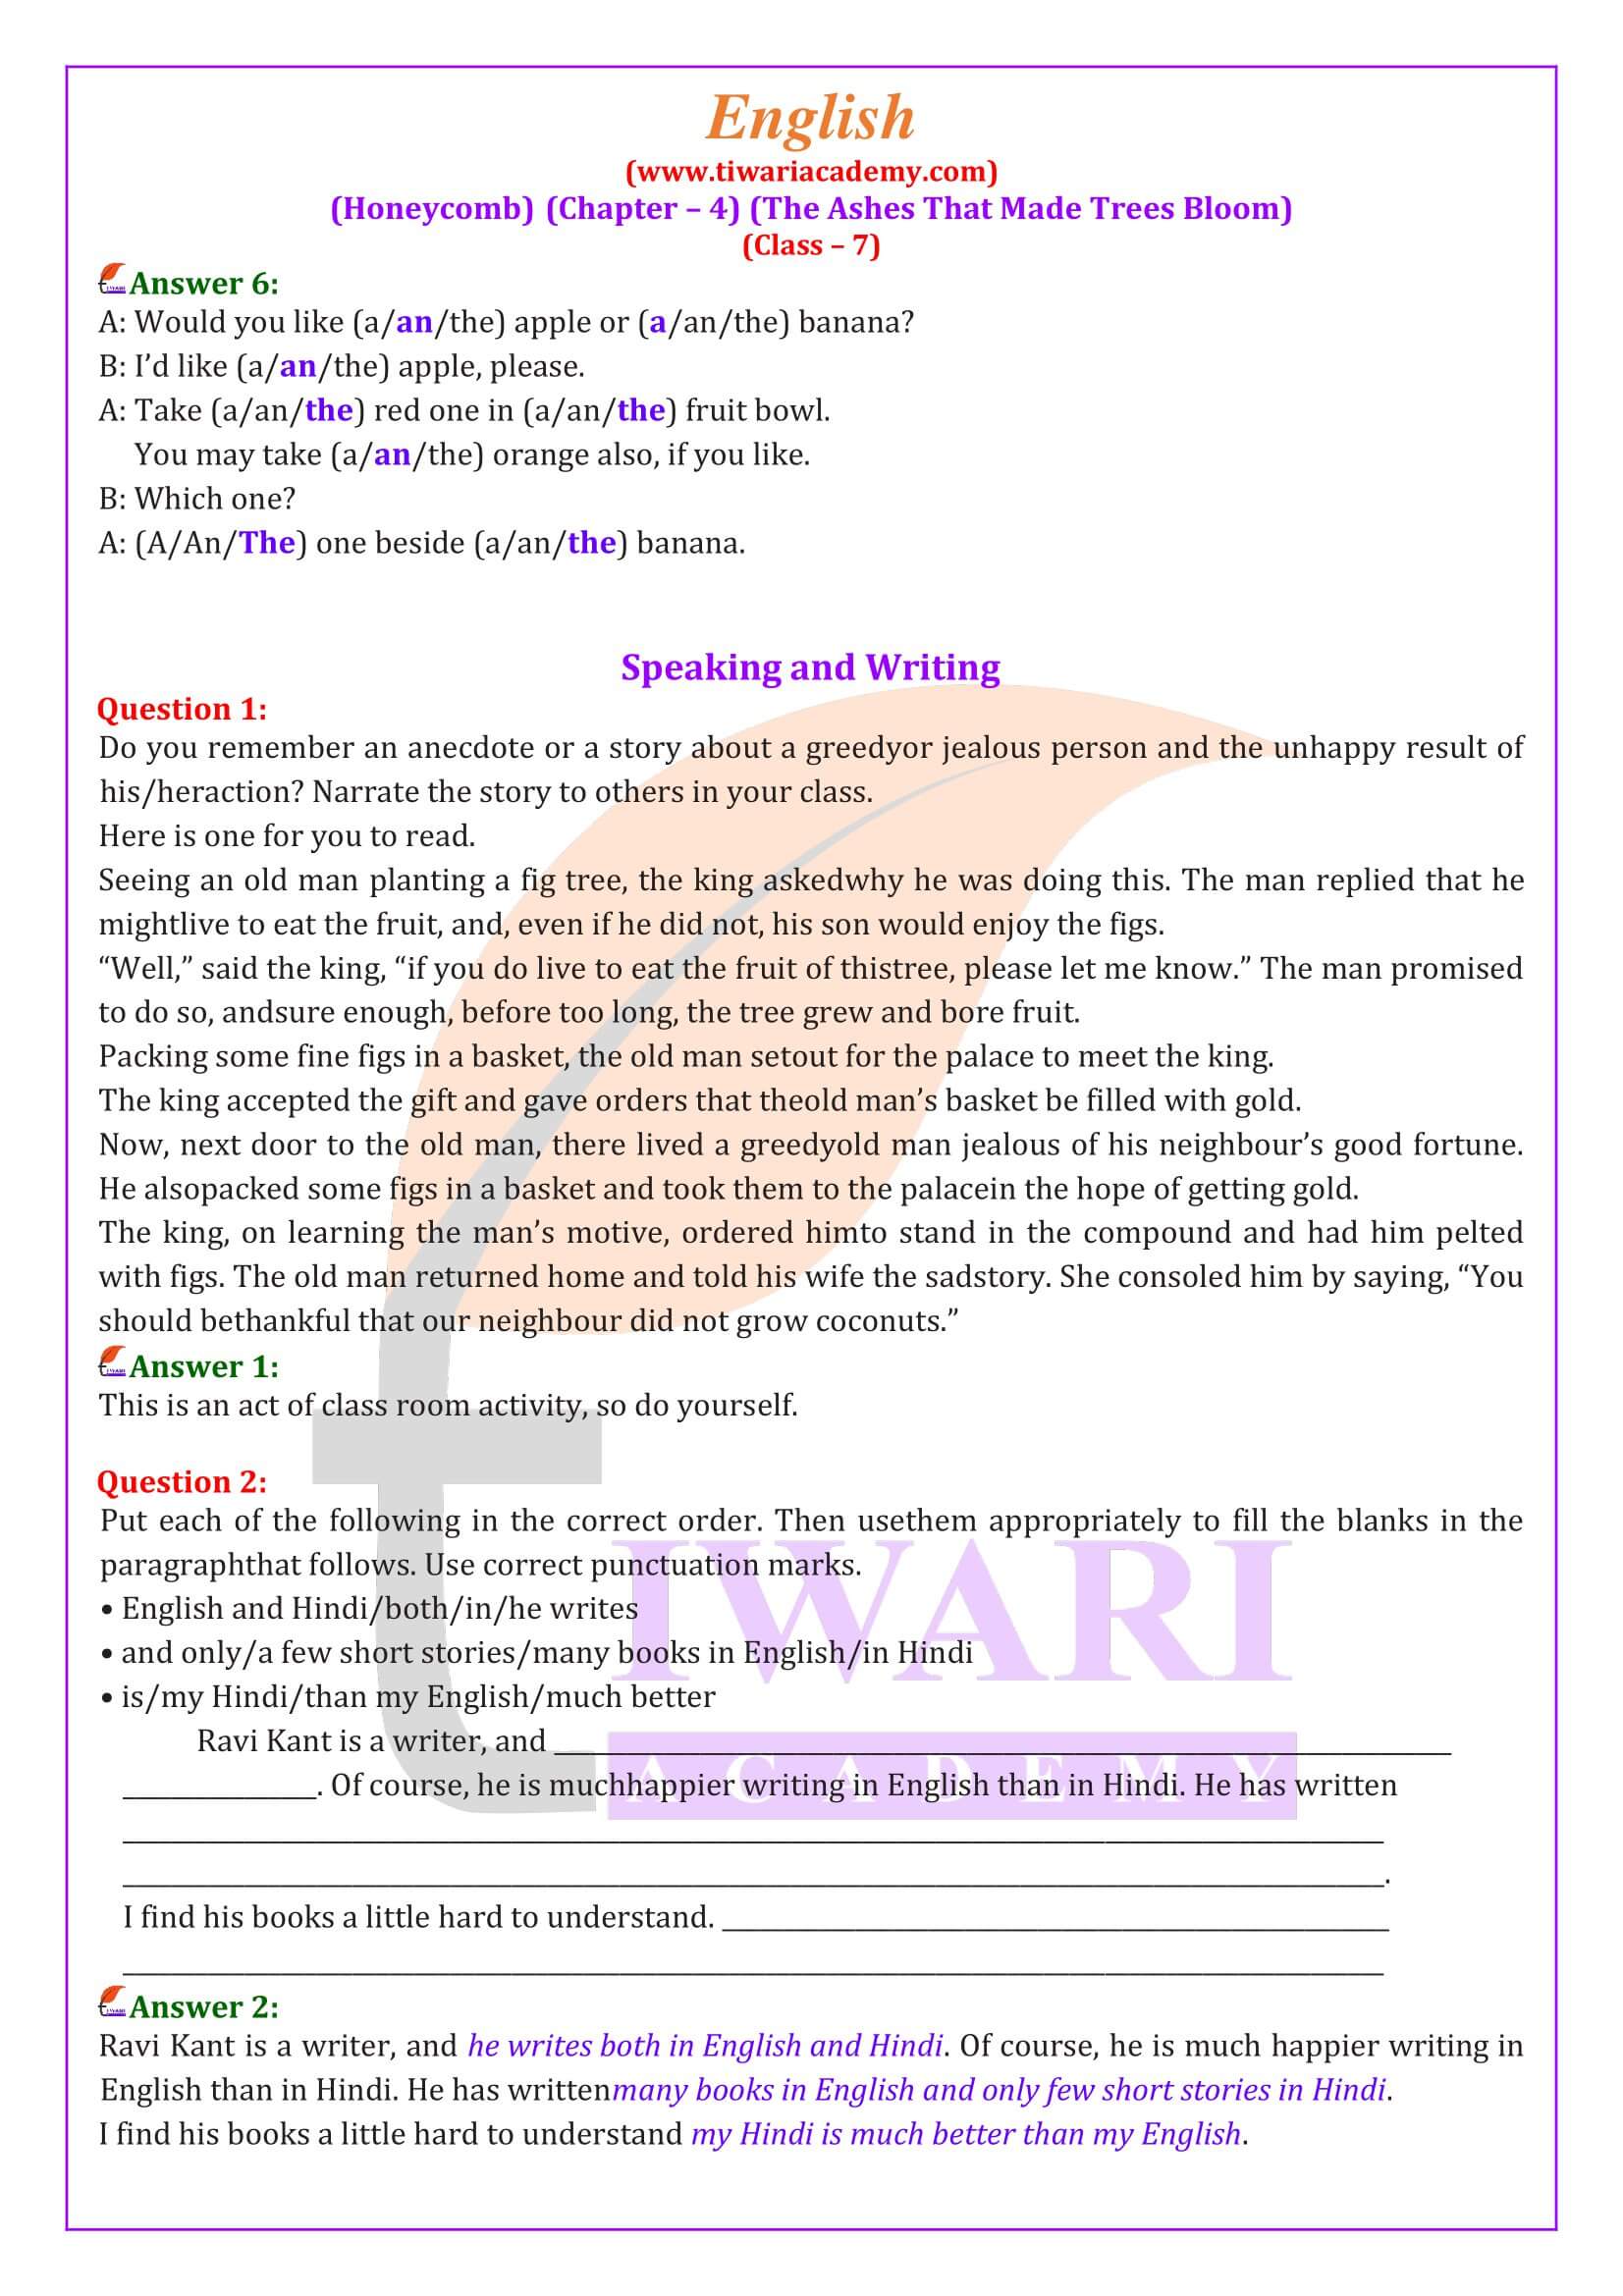 Class 7 English Honeycomb Chapter 4 Updated for new session